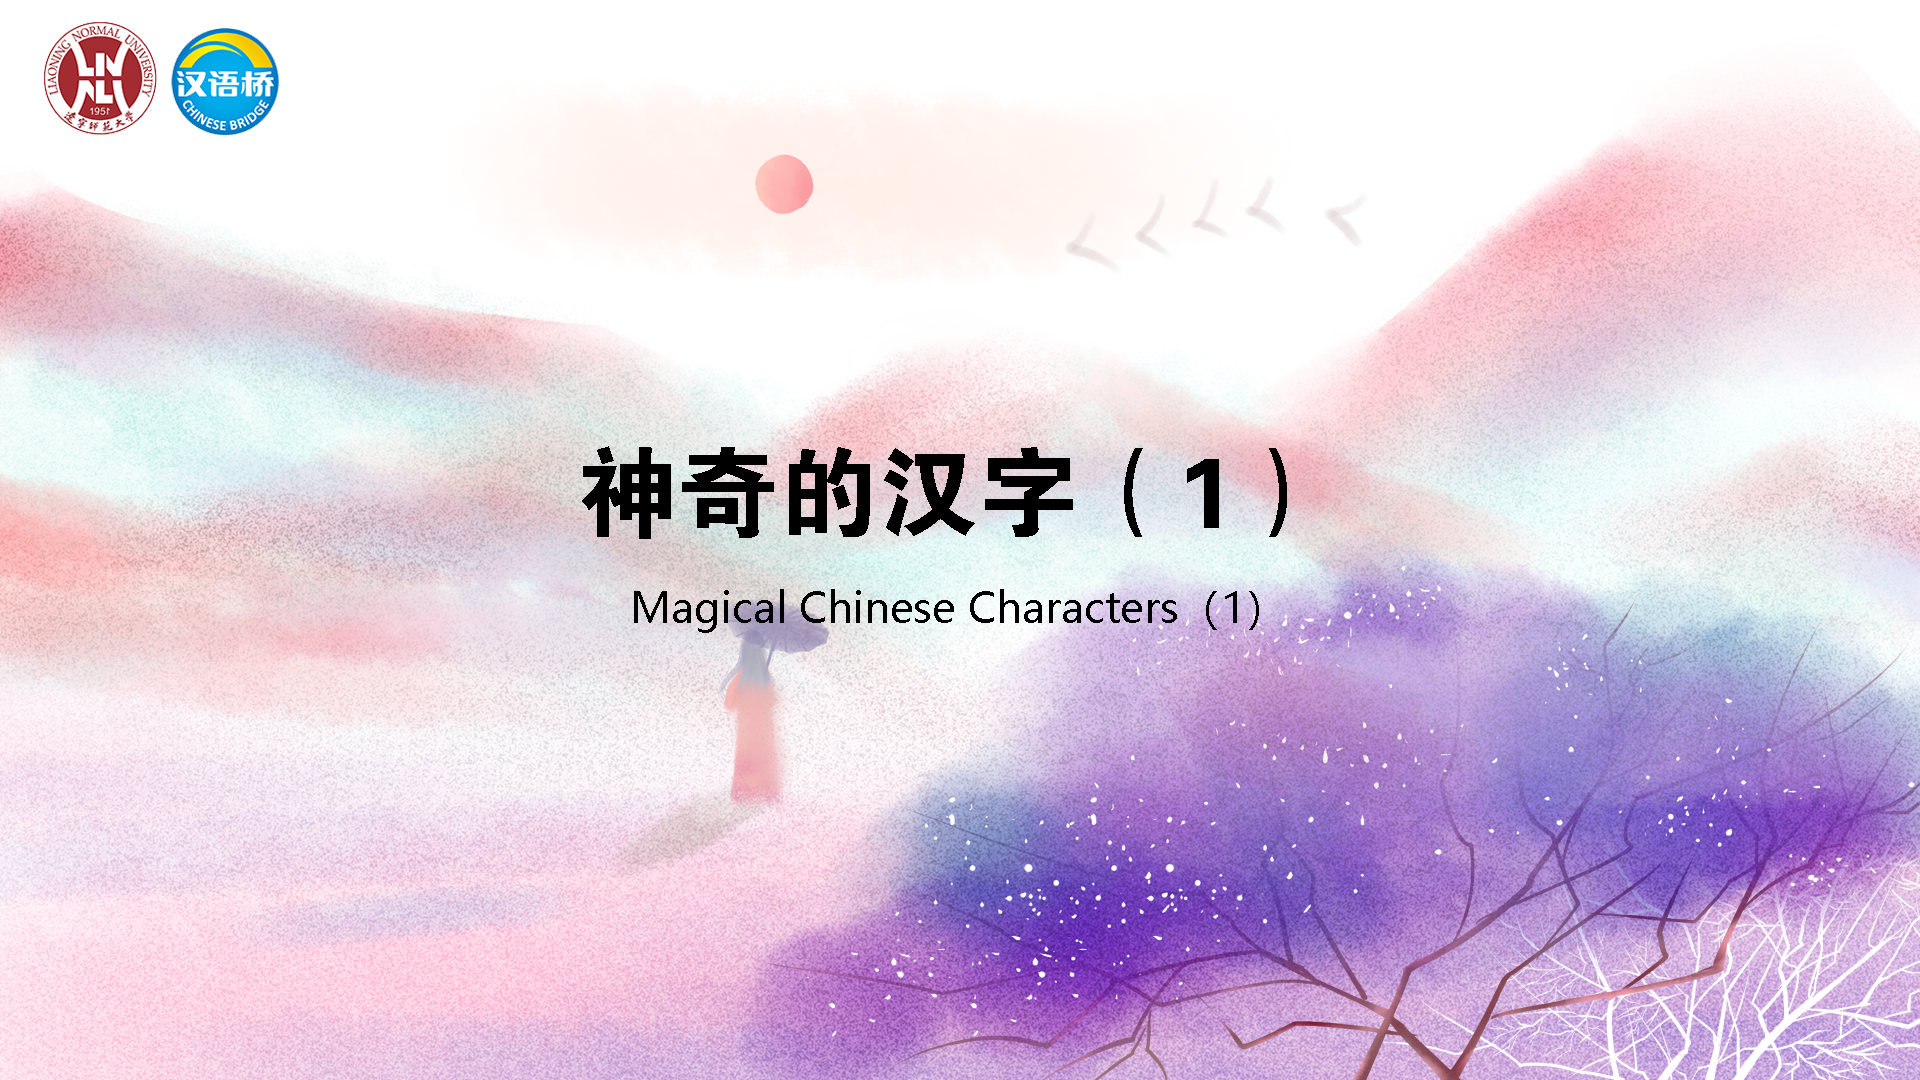 Magical Chinese Characters 01